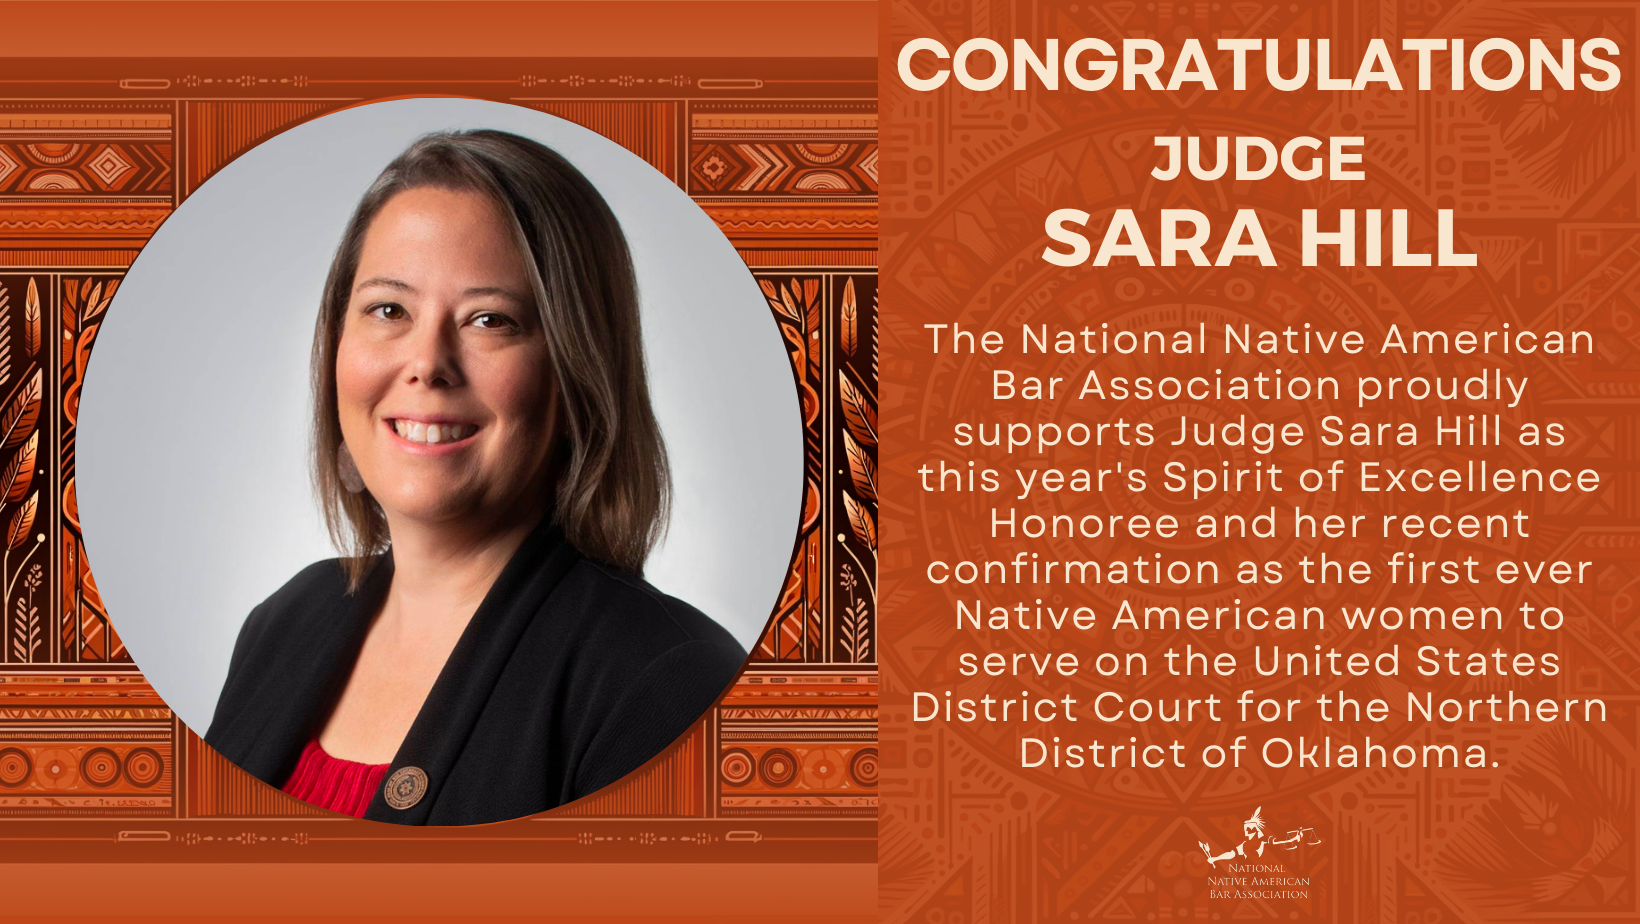 The National Native American Bar Association proudly supports Judge Sara Hill